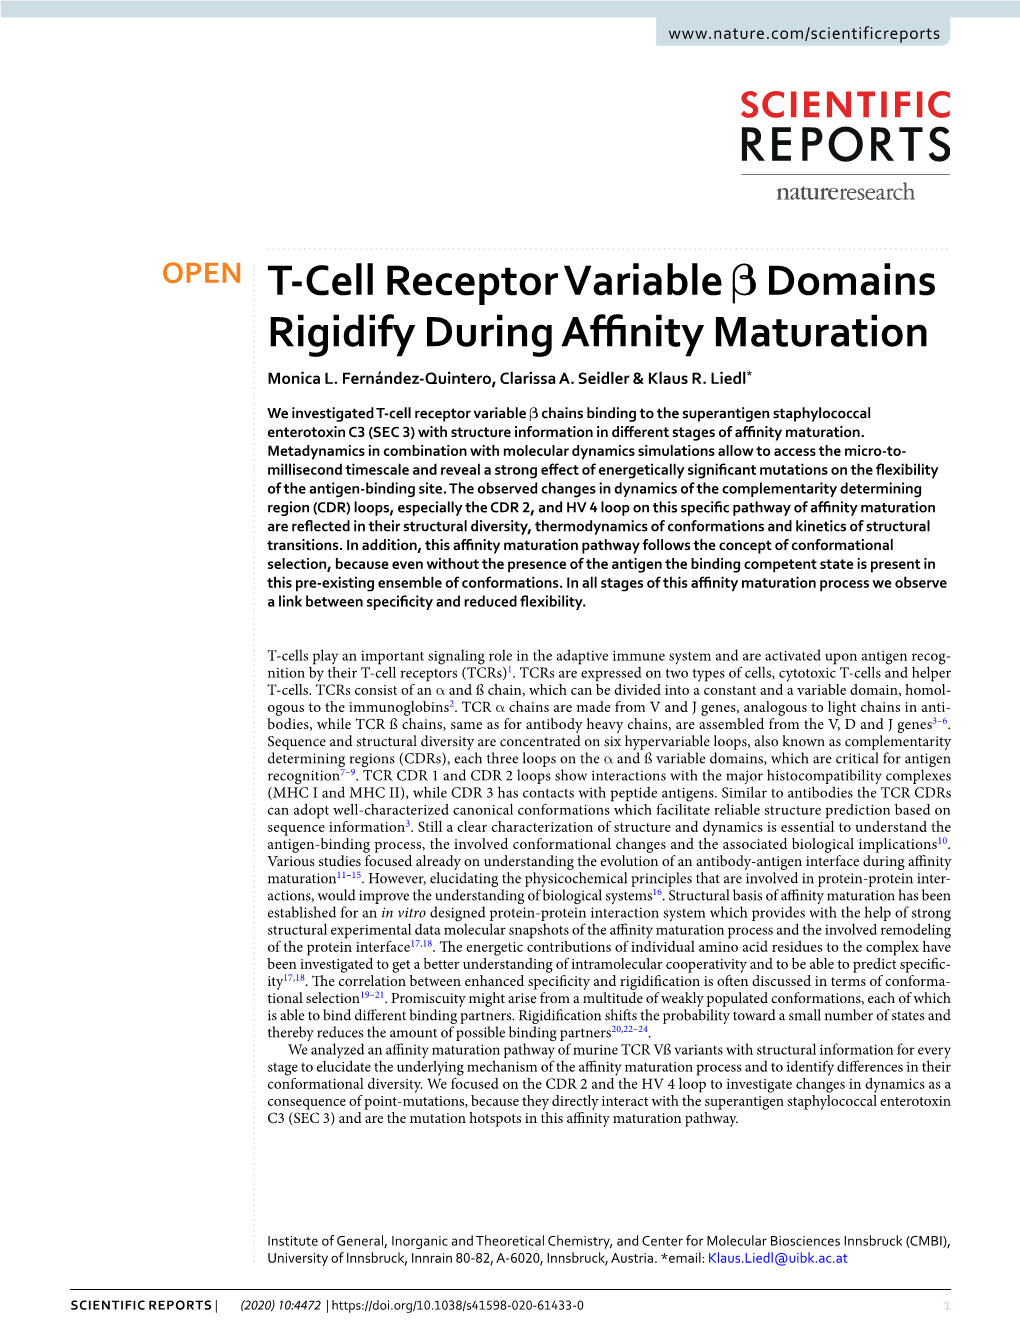 T-Cell Receptor Variable Β Domains Rigidify During Affinity Maturation